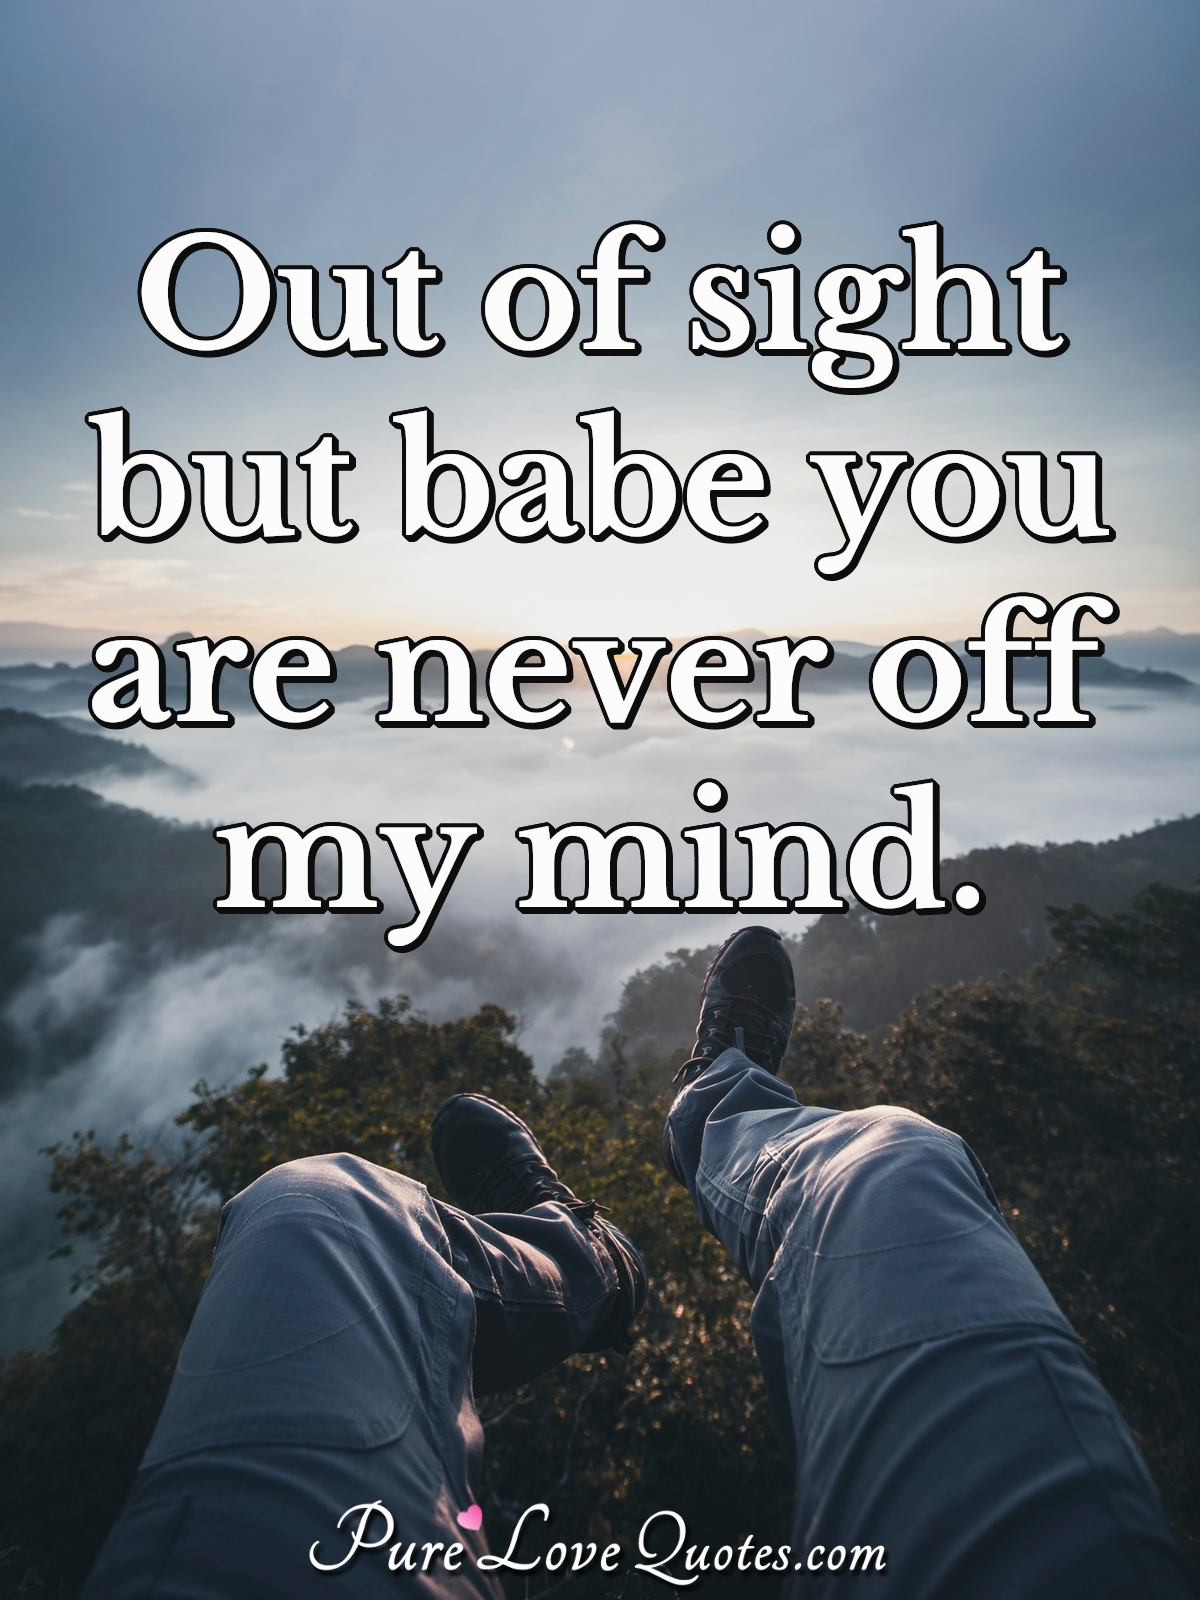 out of sight but babe you are never off my mind